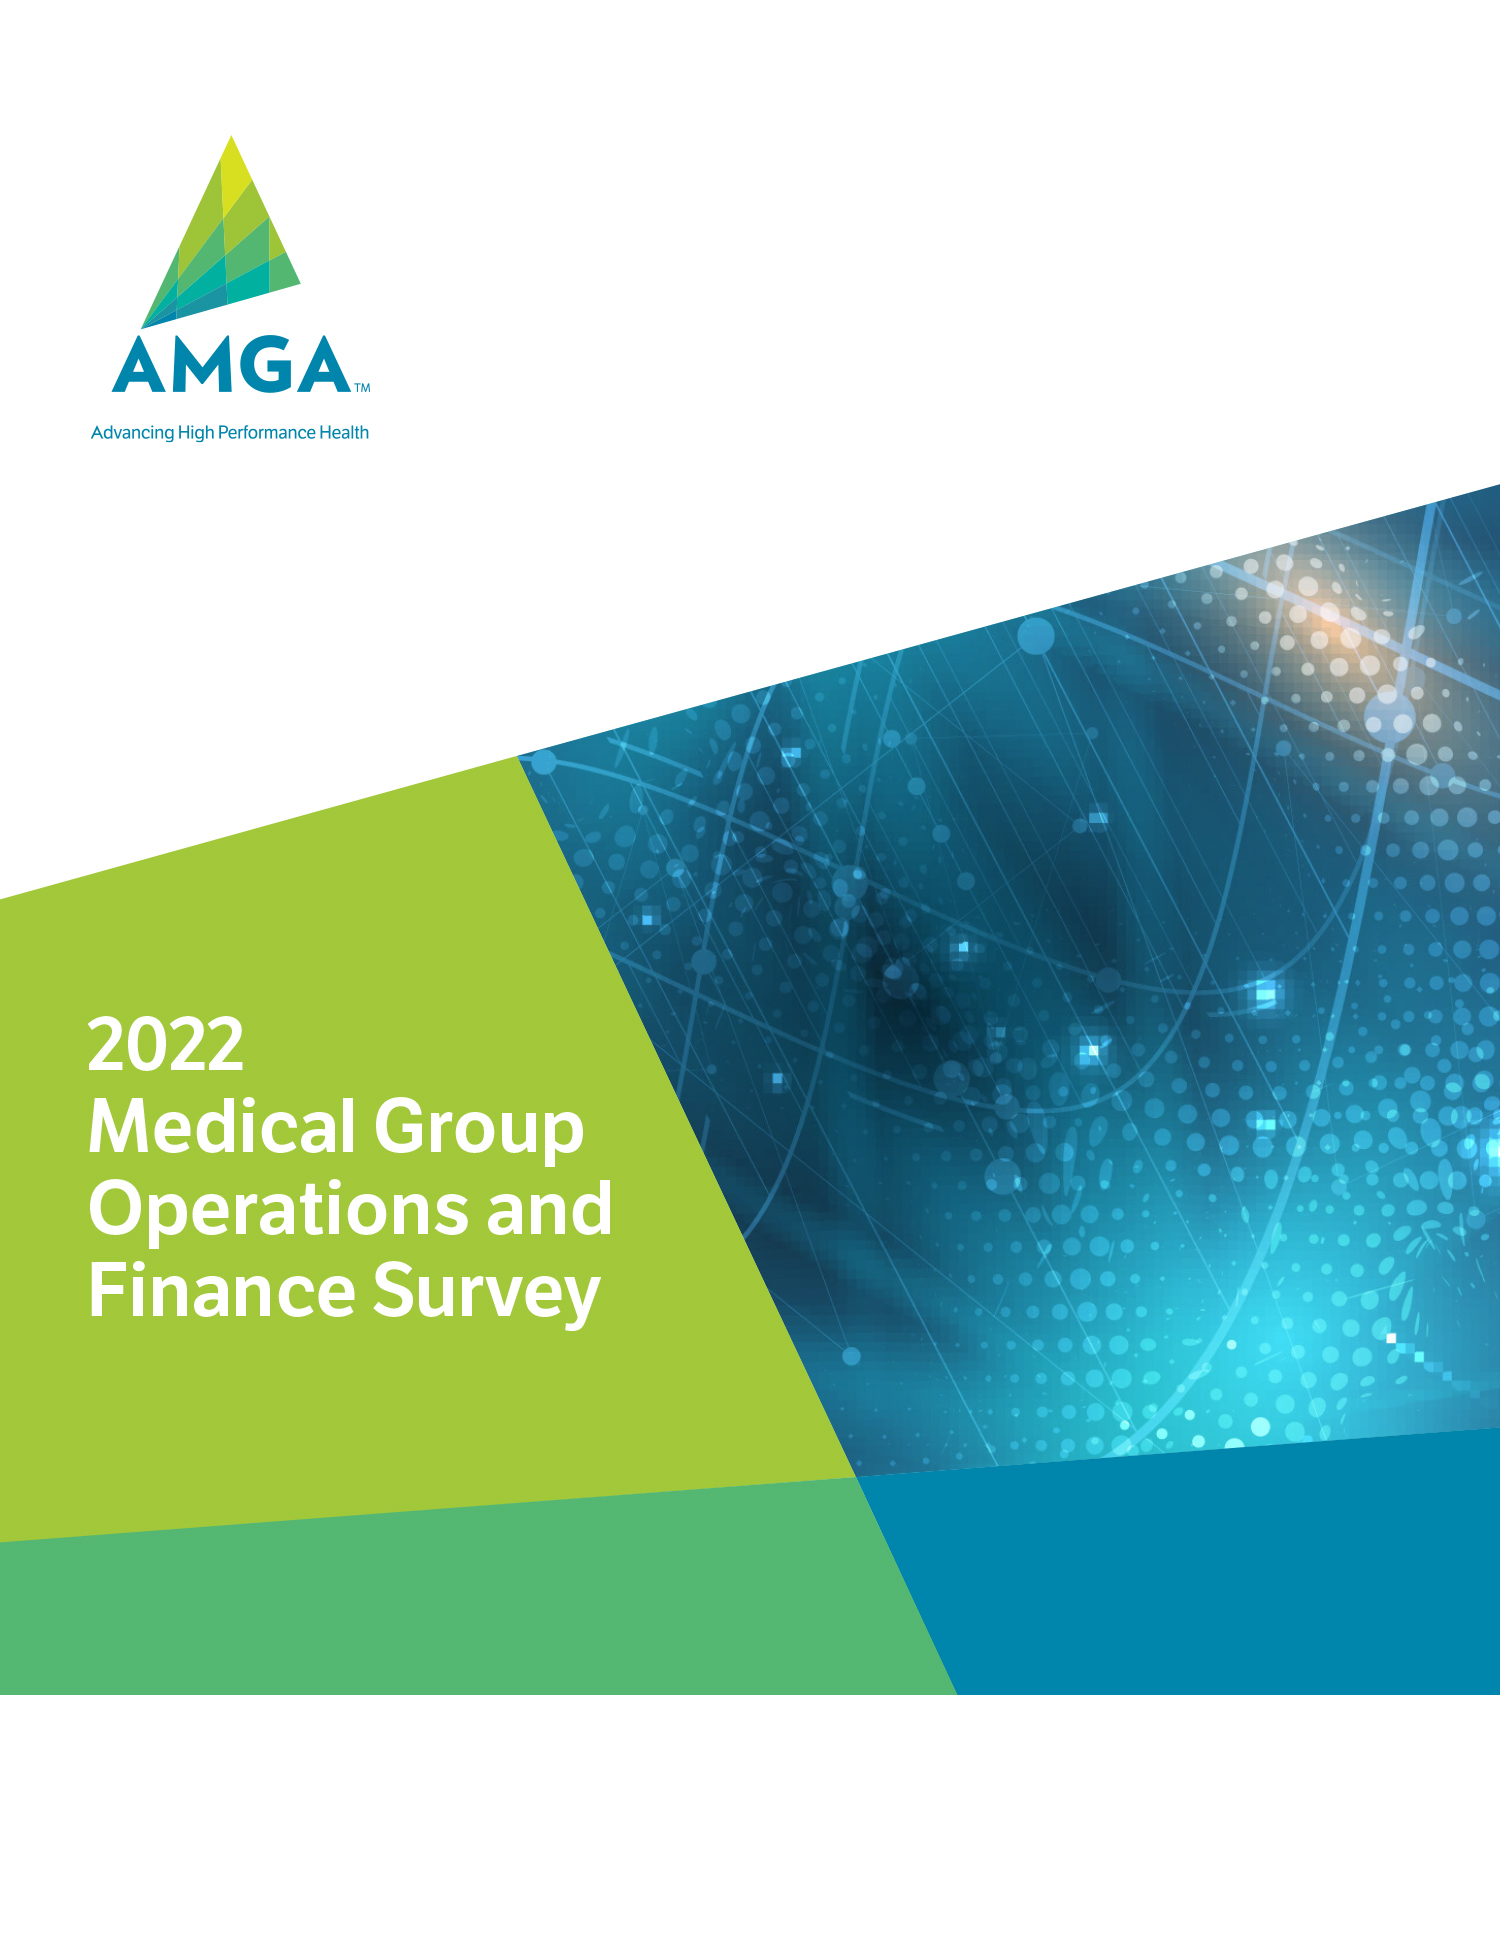 2020 Operations and Finance Survey